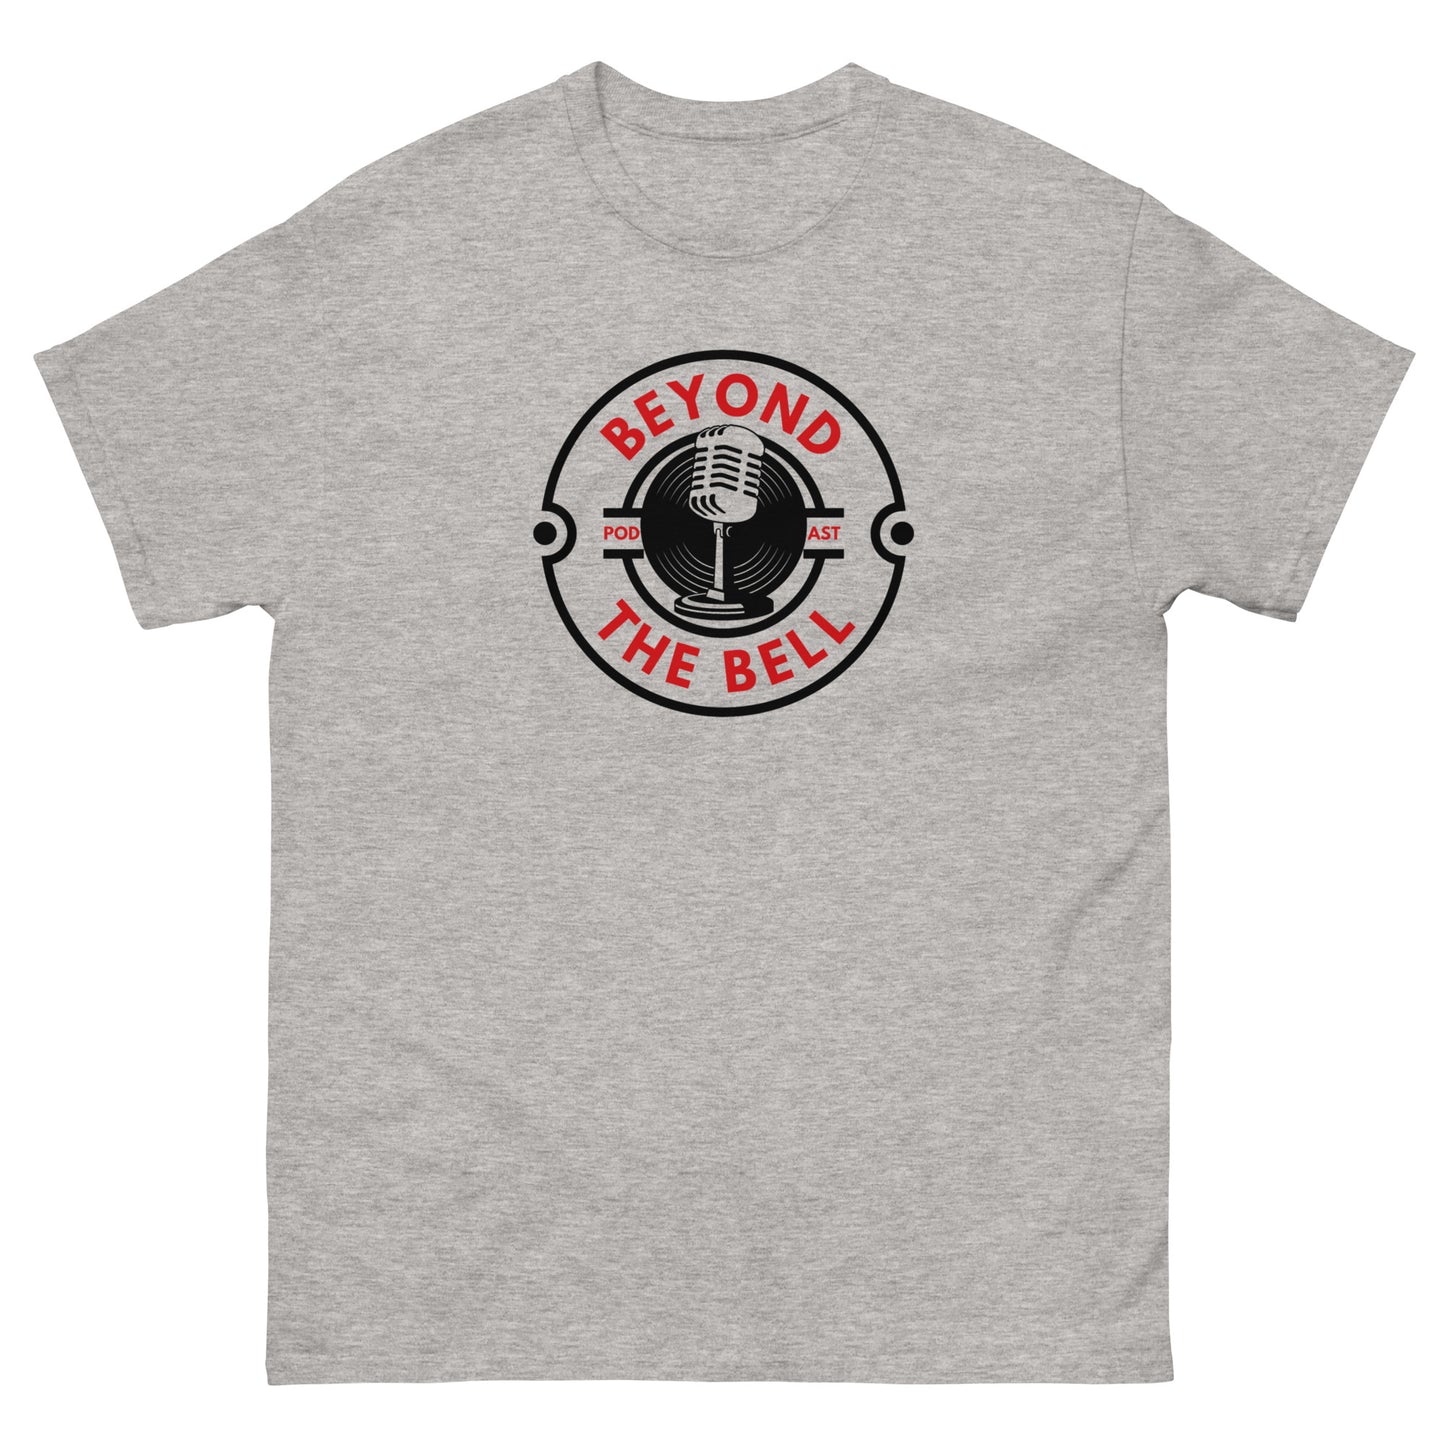 Beyond The Bell Podcast Classic tee